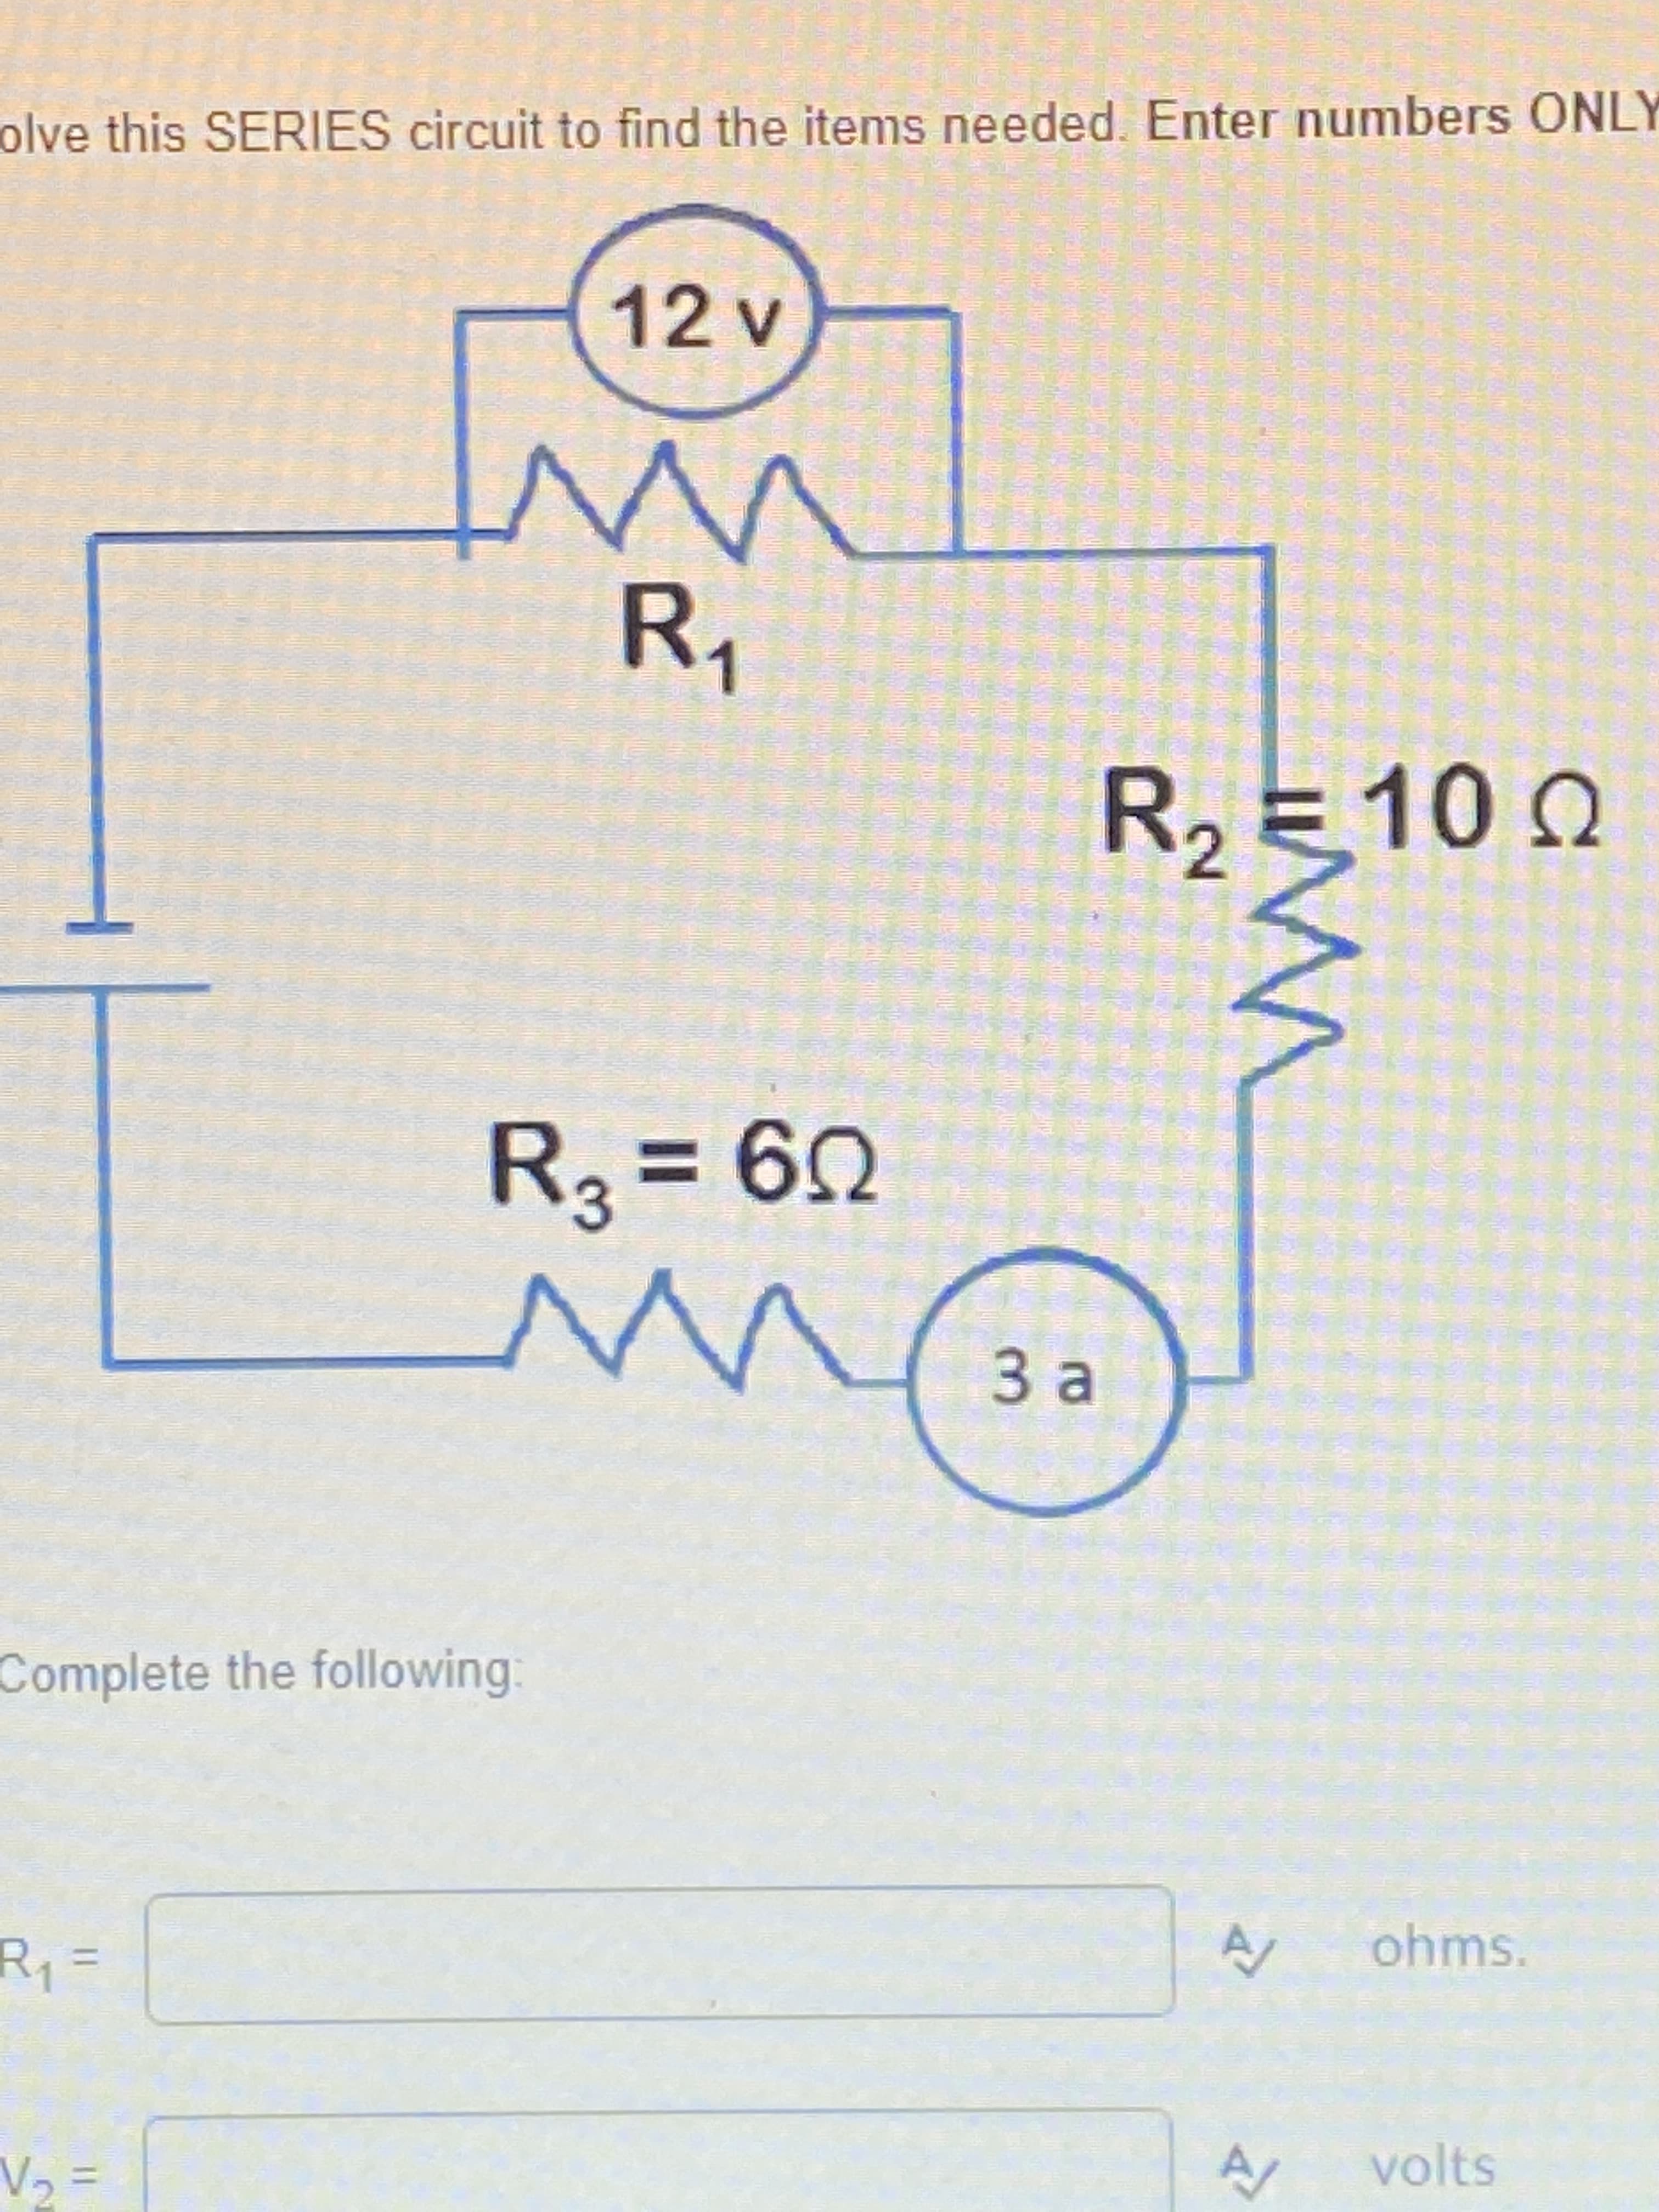 3.
olve this SERIES circuit to find the items needed. Enter numbers ONLY
R,
R2 E10 n
%3D
U9 =
Complete the following:
ohms.
volts
